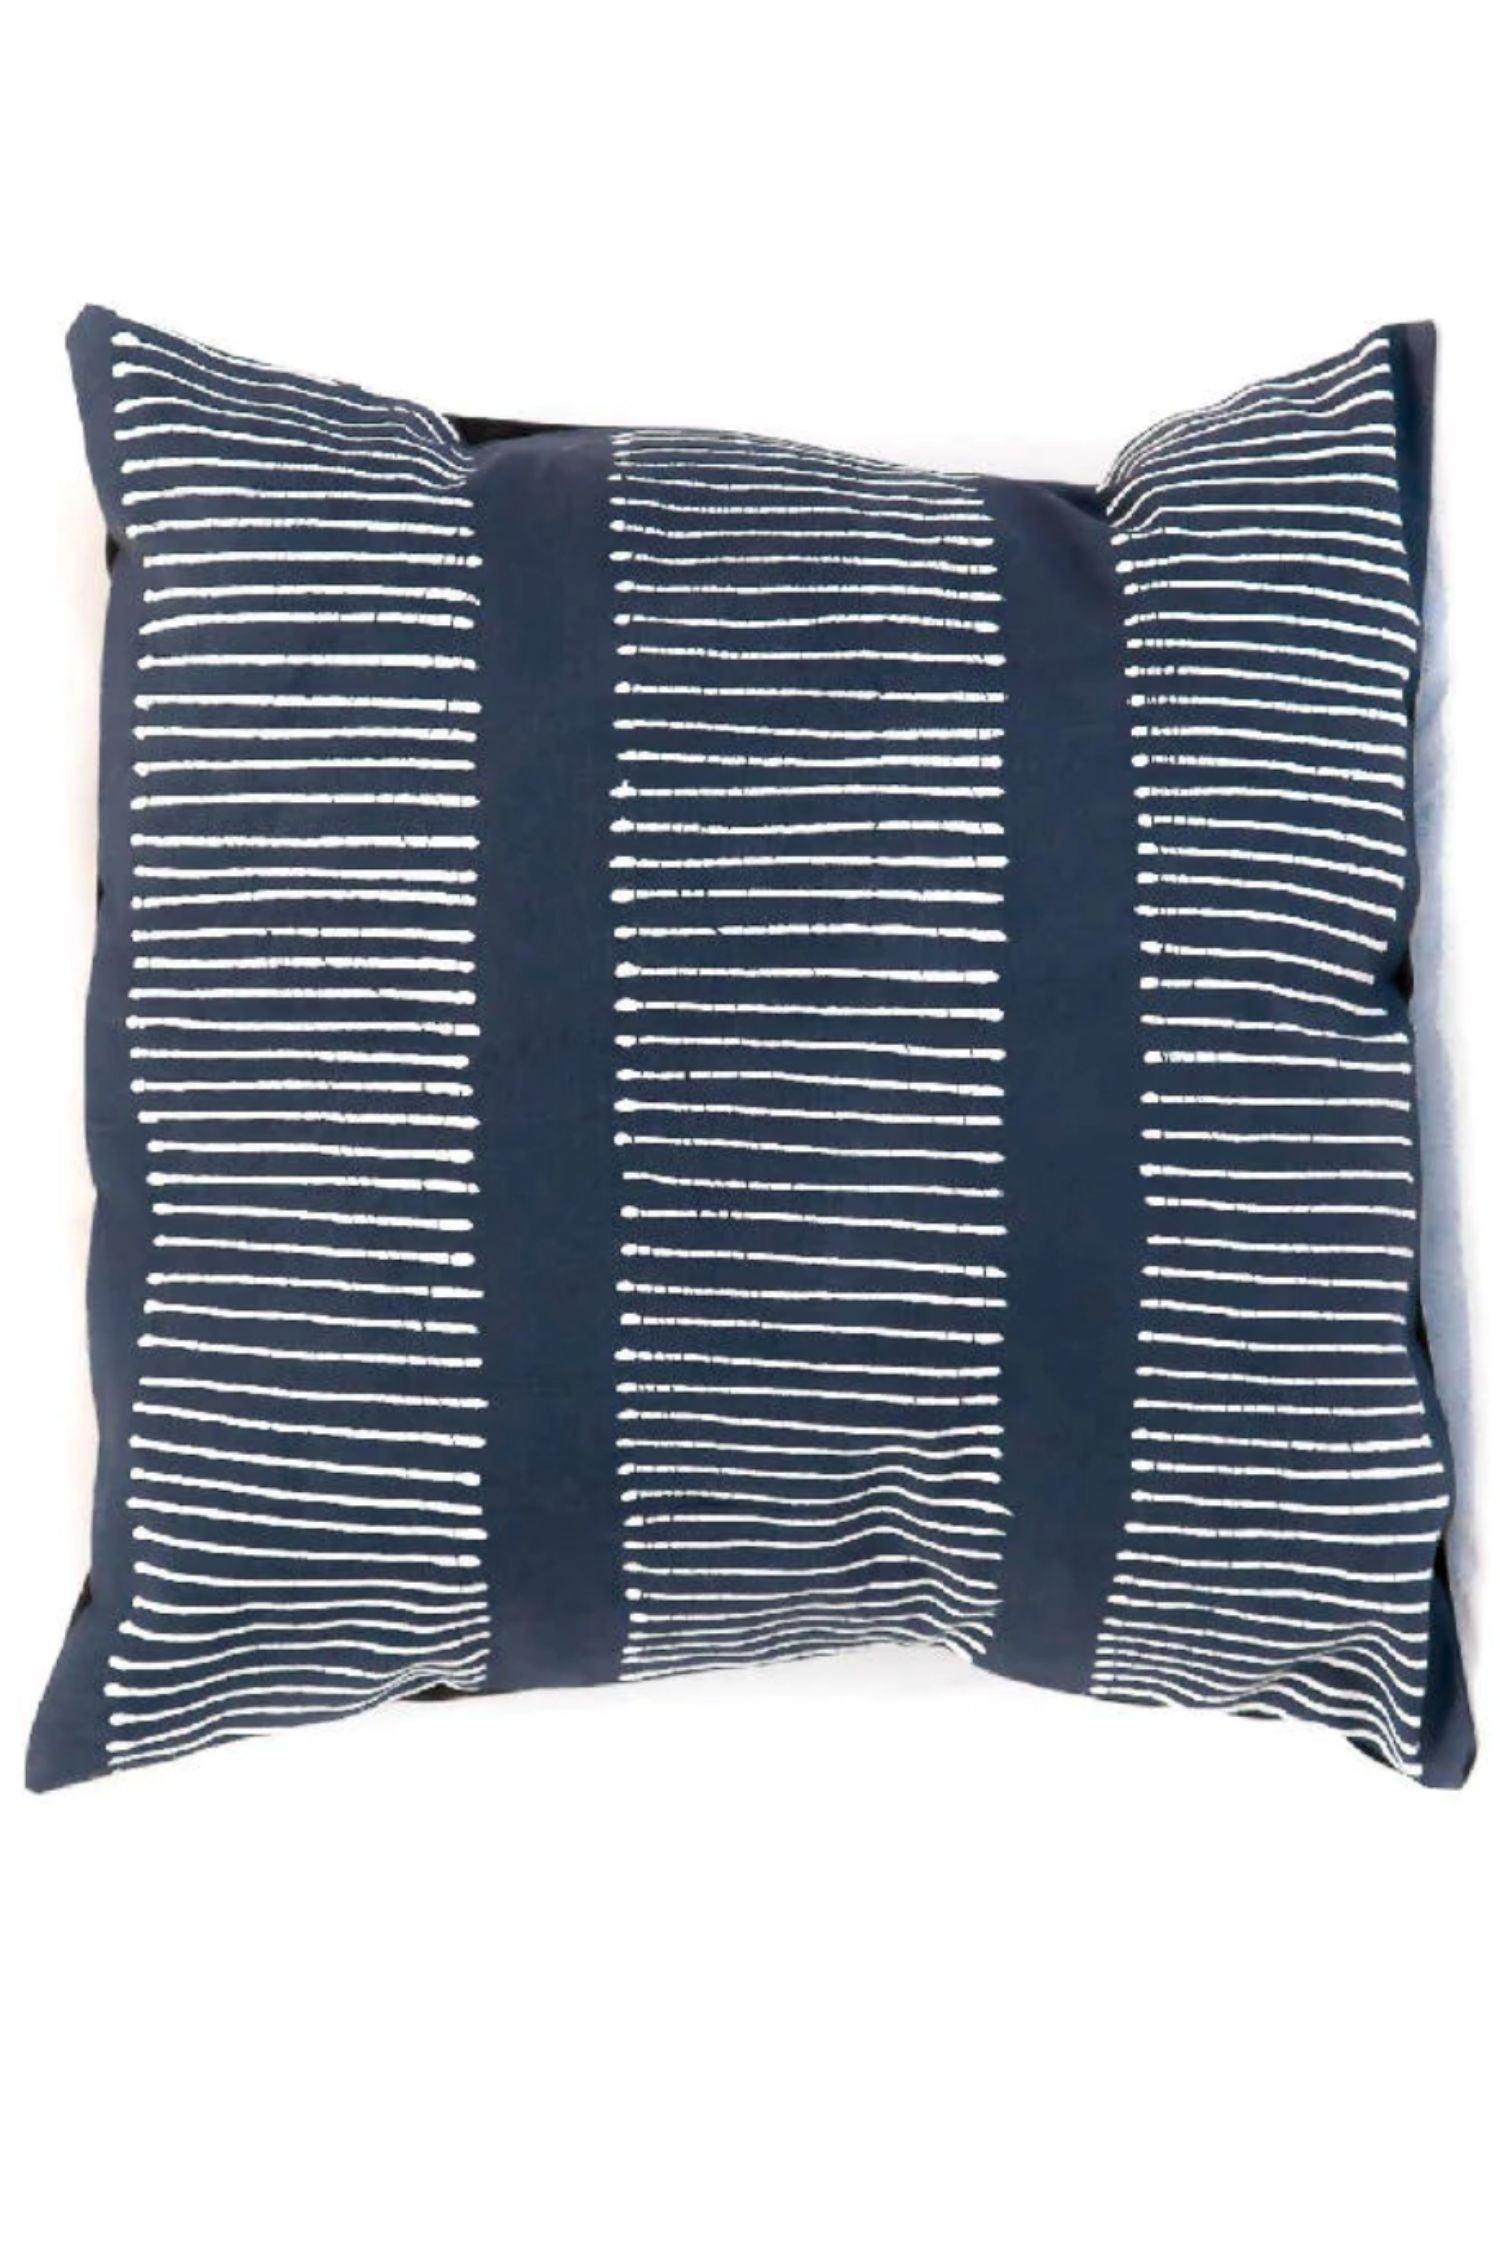 Cushion Cover - Hand Painted Indigo Lines